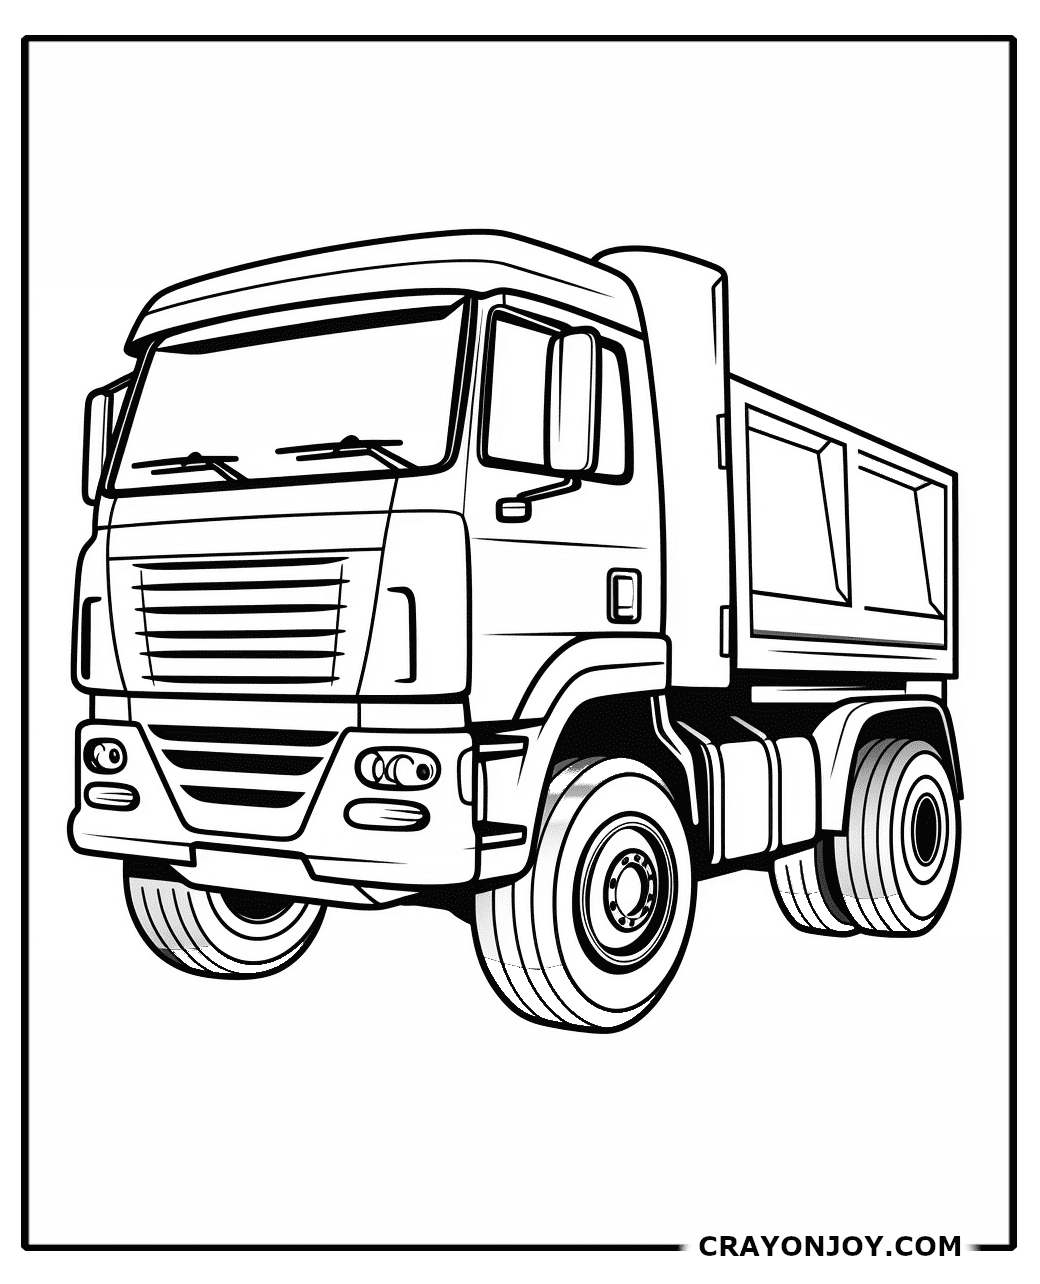 Free Printable Garbage Truck Coloring Pages for Kids and Adults